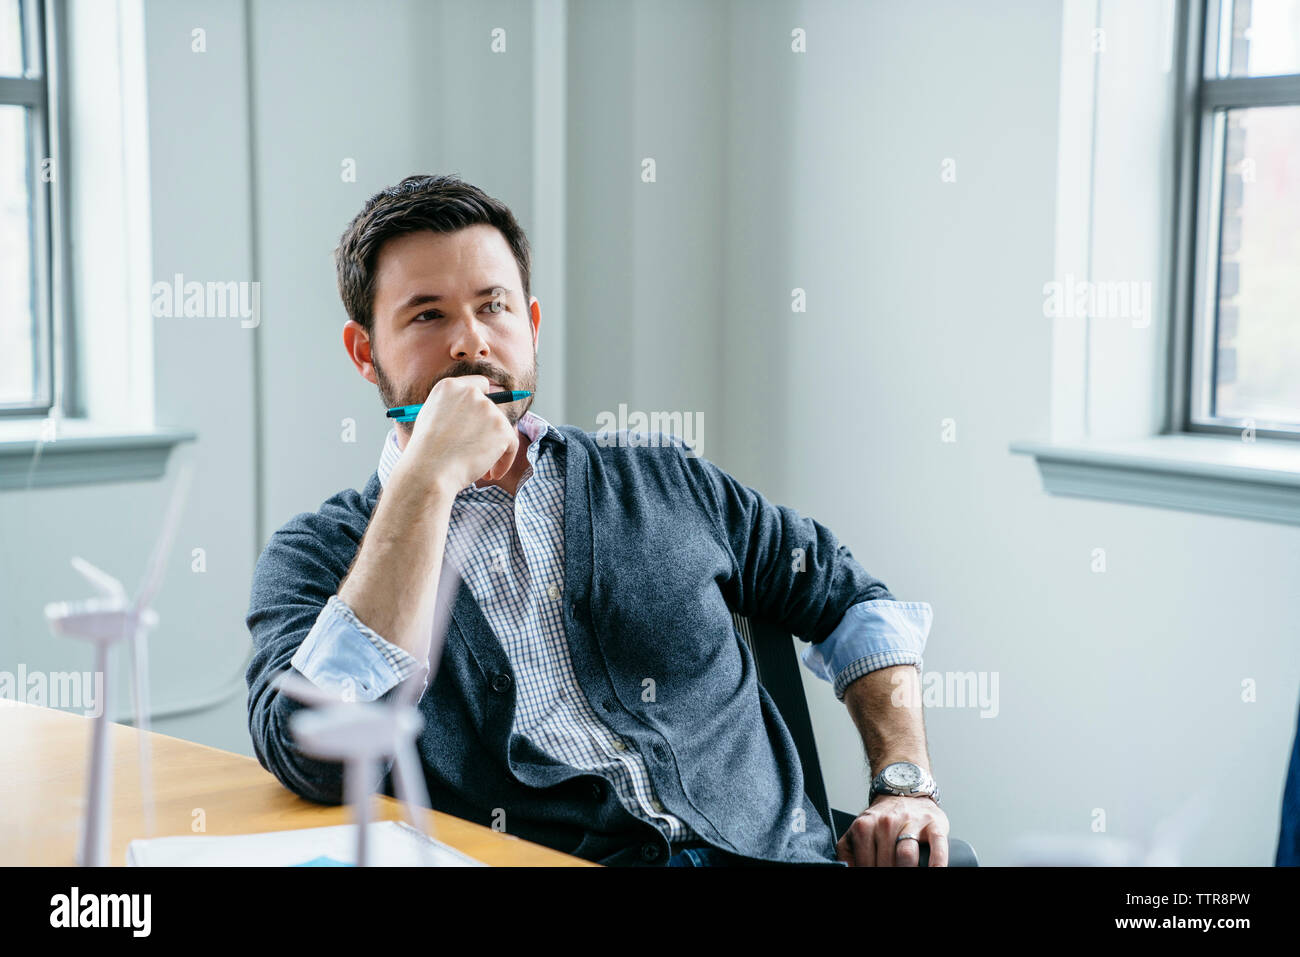 Thoughtful businessman sitting on chair in office Stock Photo